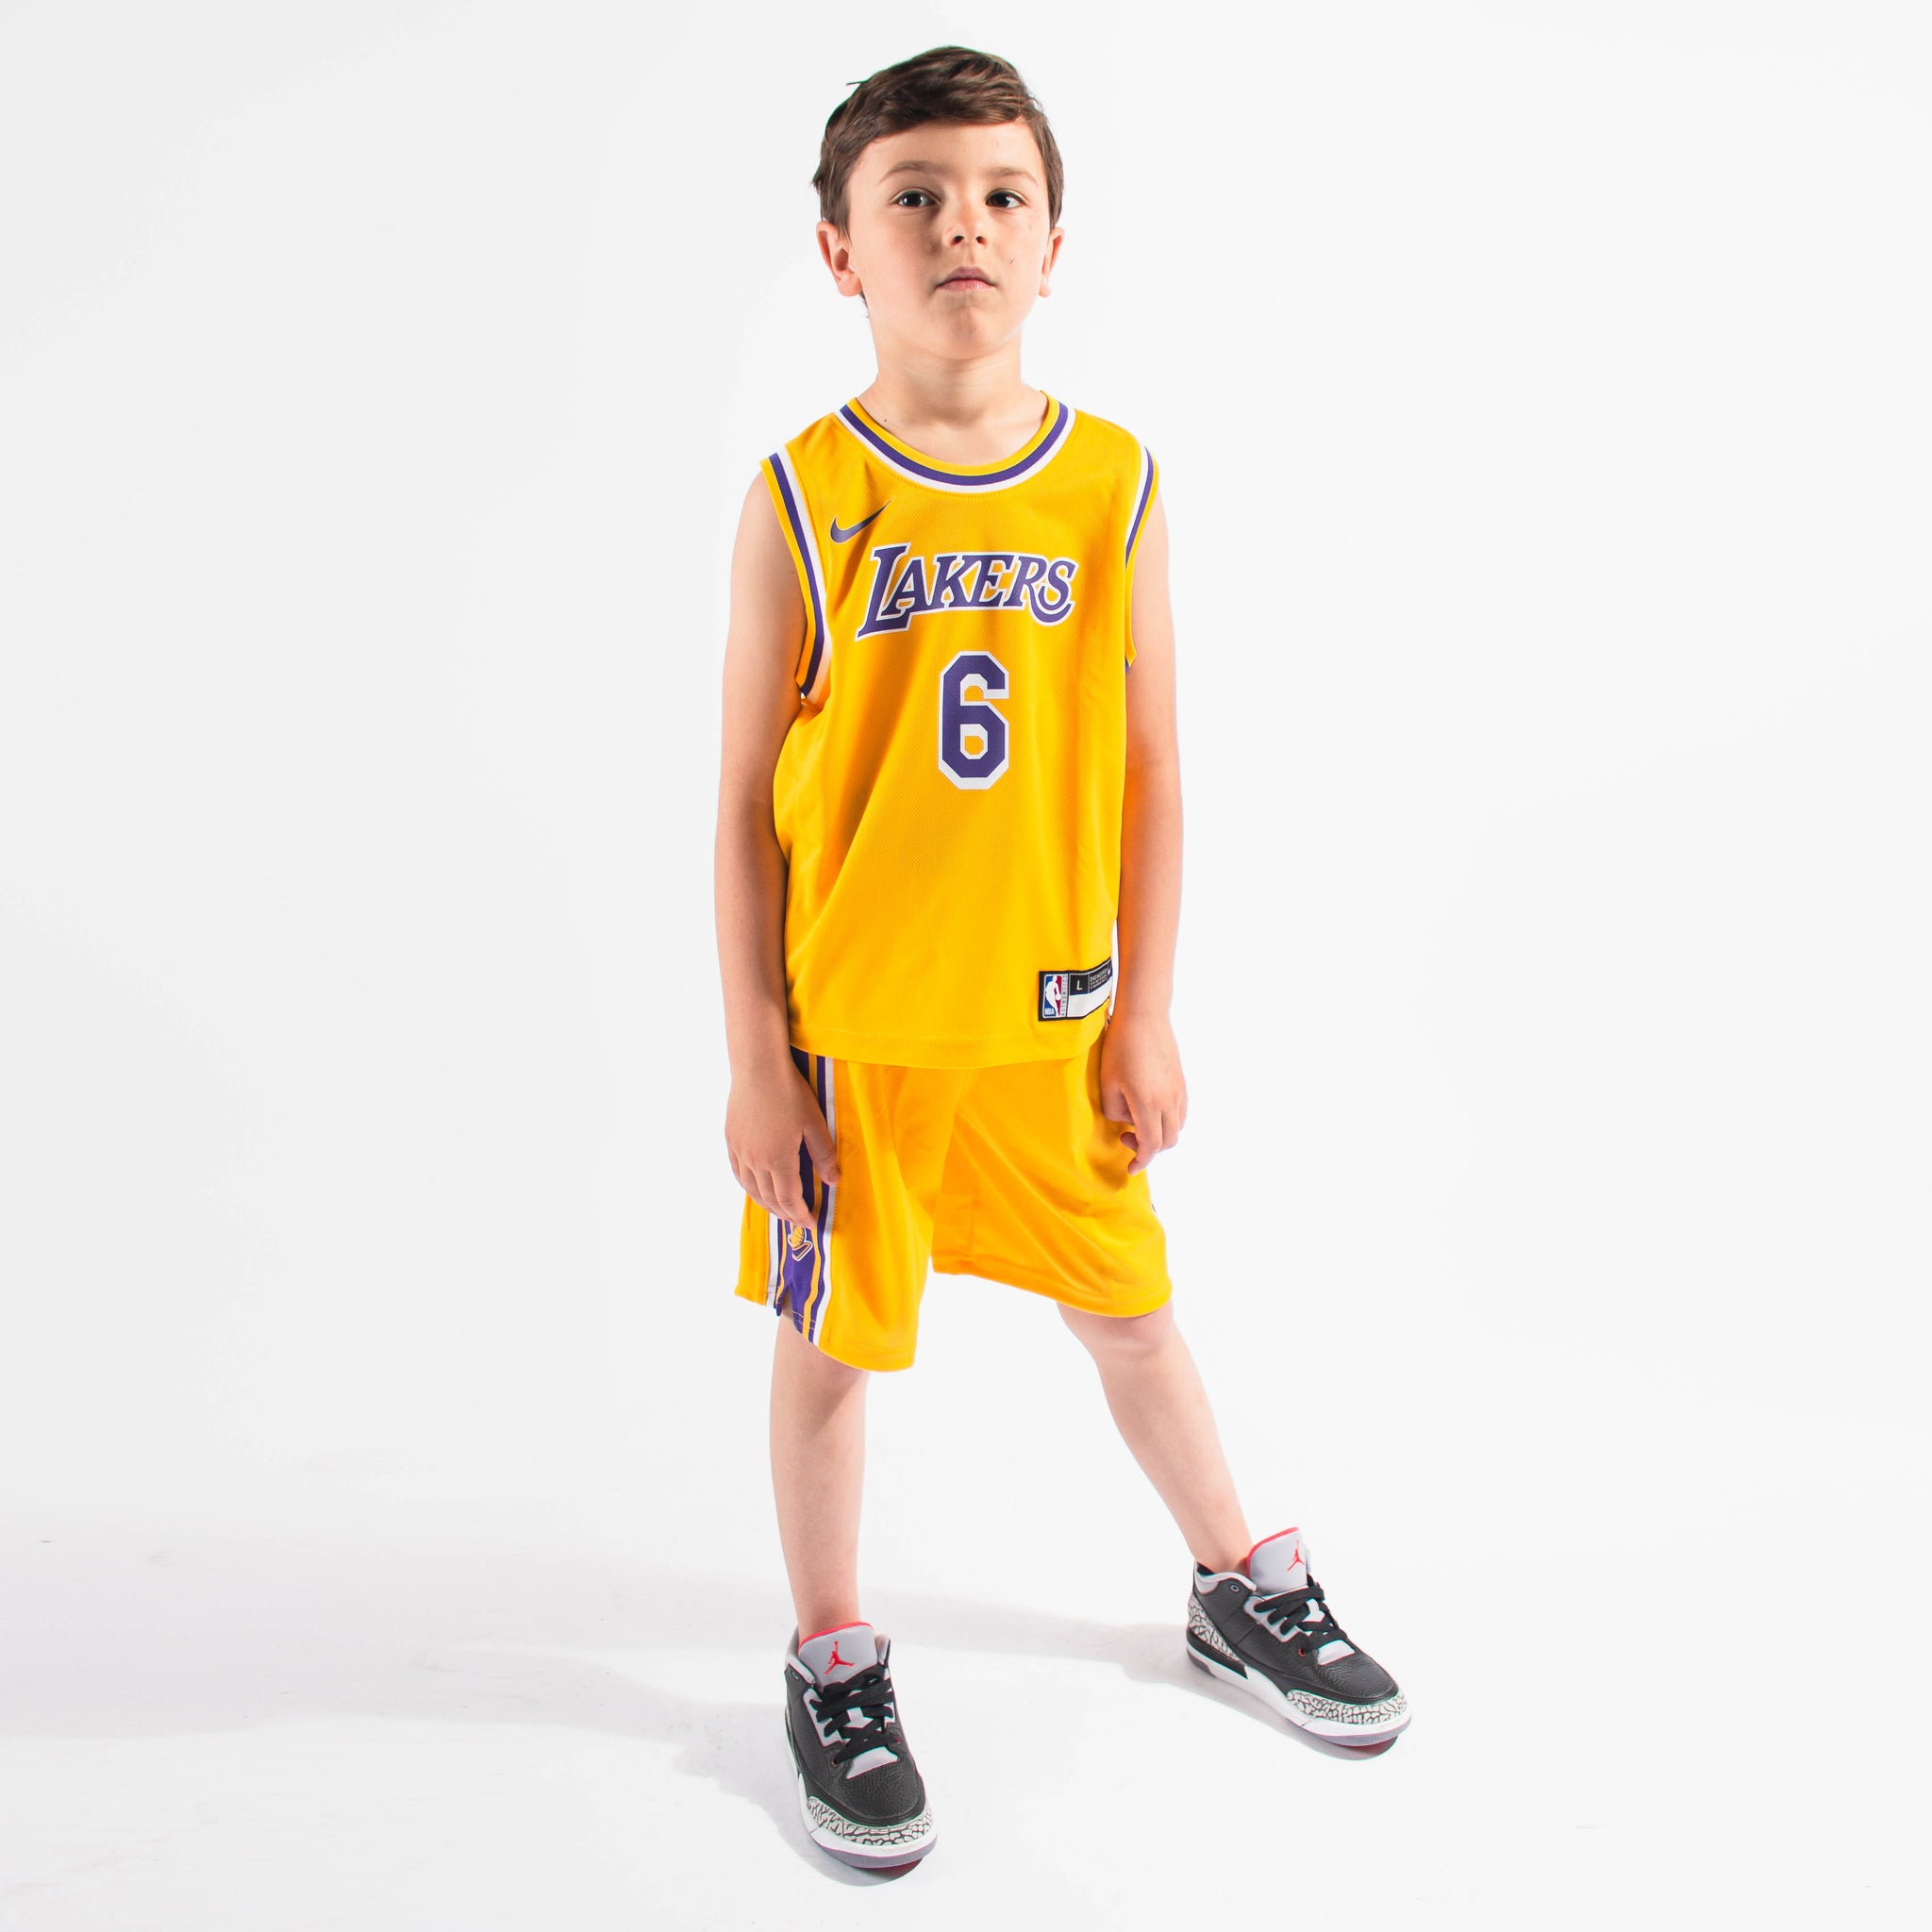 Nike LeBron James Los Angeles Lakers Icon Replica Jersey, Toddler